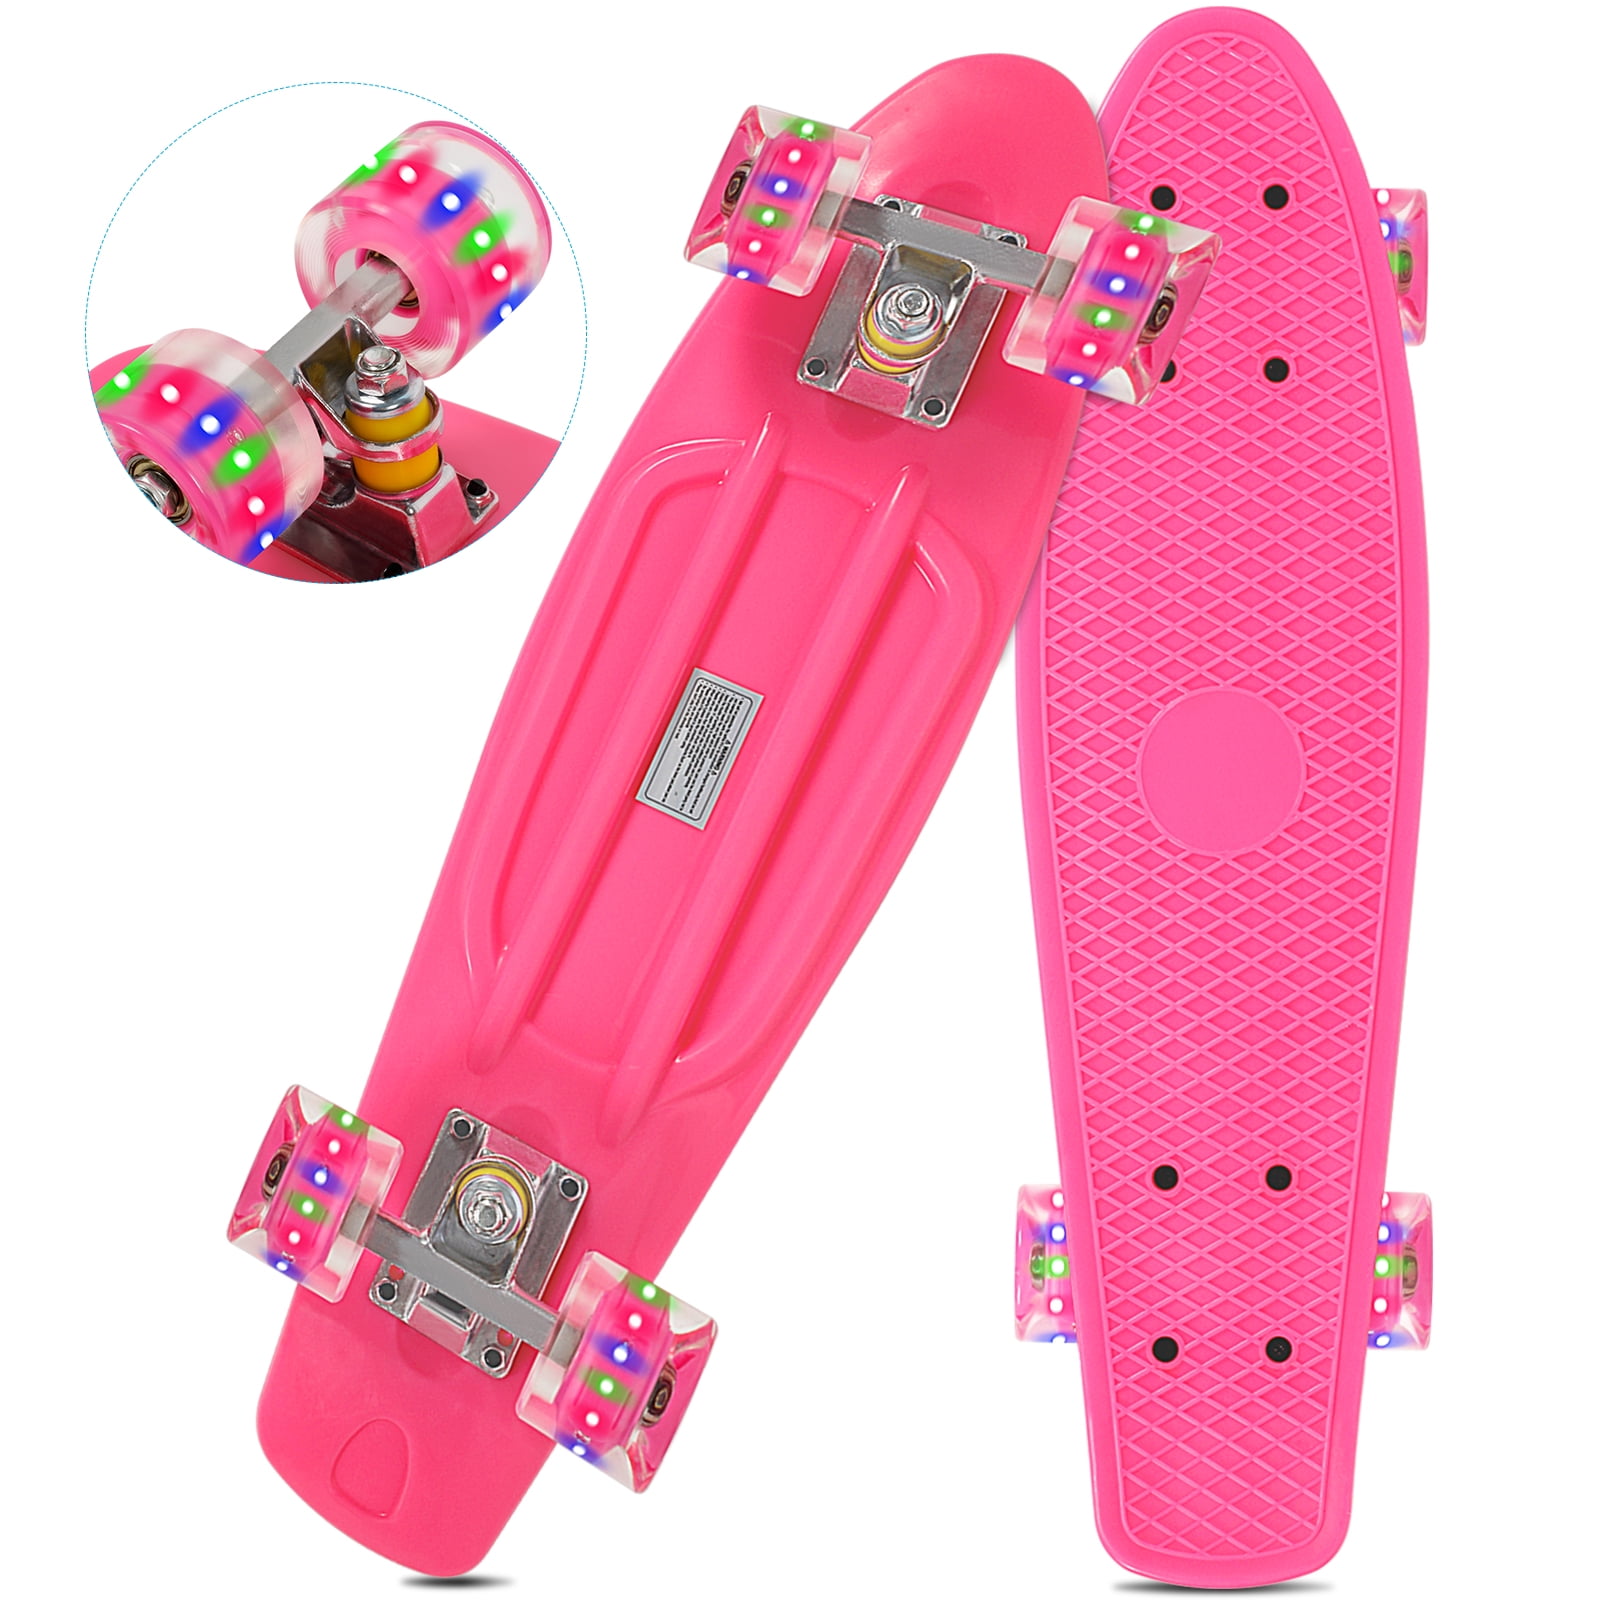 Mini Cruiser Skateboard Complete Plastic Retro Board with Bendable Deck and Smooth PU Casters/Speed for Kids Youths Beginners 